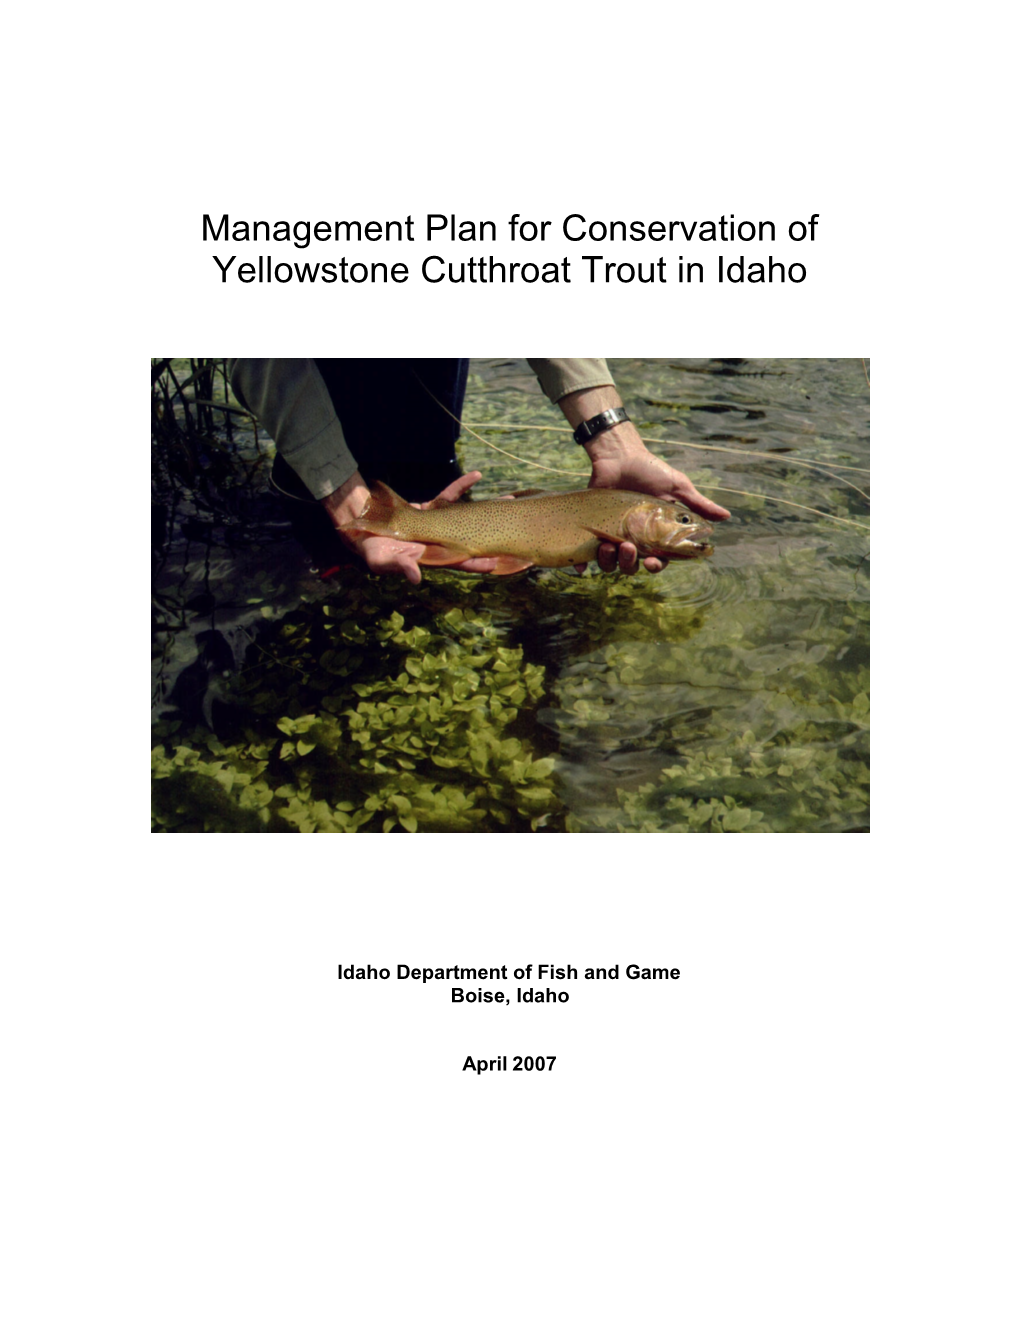 Management Plan for Conservation of Yellowstone Cutthroat Trout in Idaho